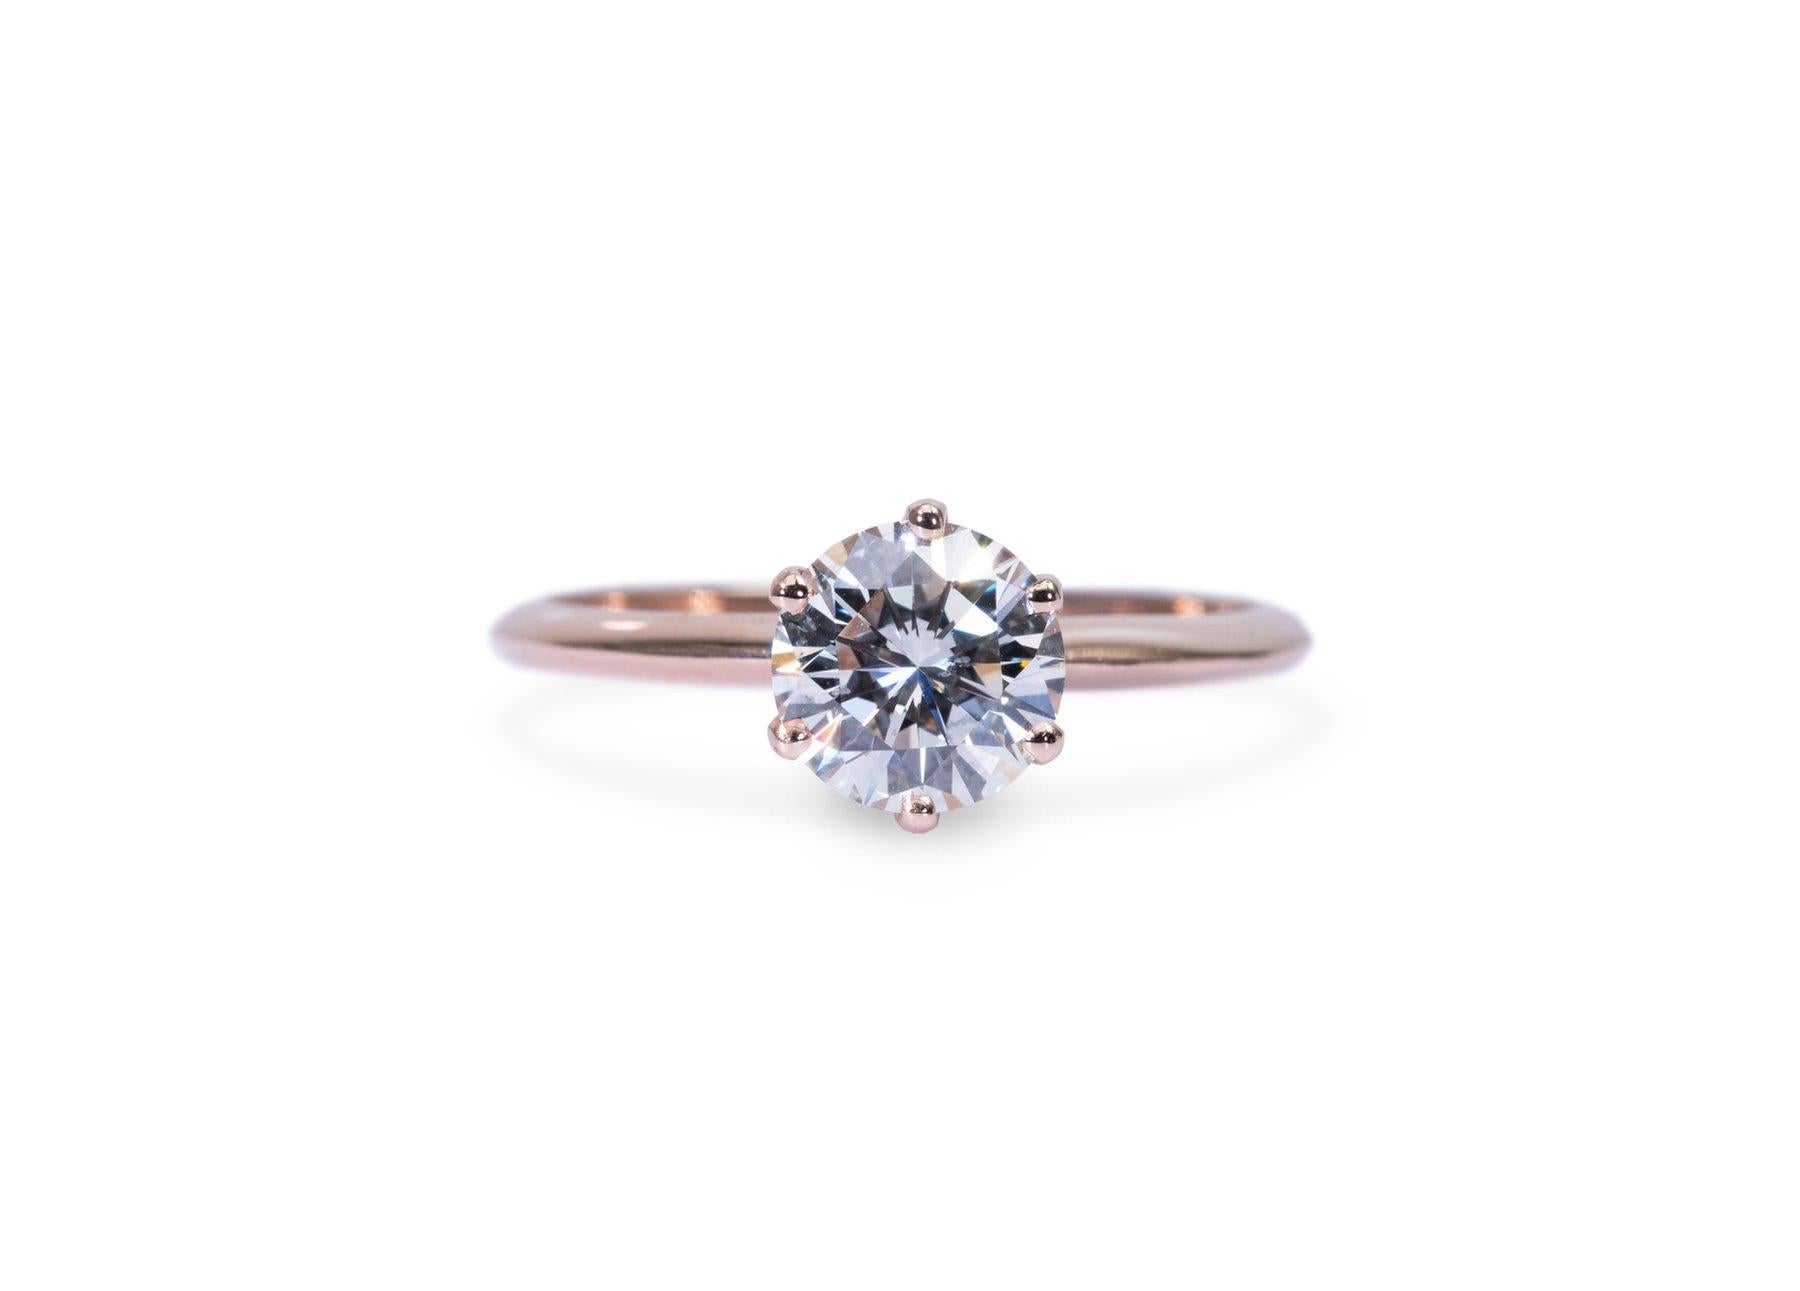 Exquisite 1.09ct Diamond Solitaire Ring in 18k Rose Gold - GIA Certified

Celebrate the essence of luxury with this sophisticated 18k rose gold solitaire ring, featuring a stunning 1.09-carat round diamond.  Certified by the GIA, this piece is